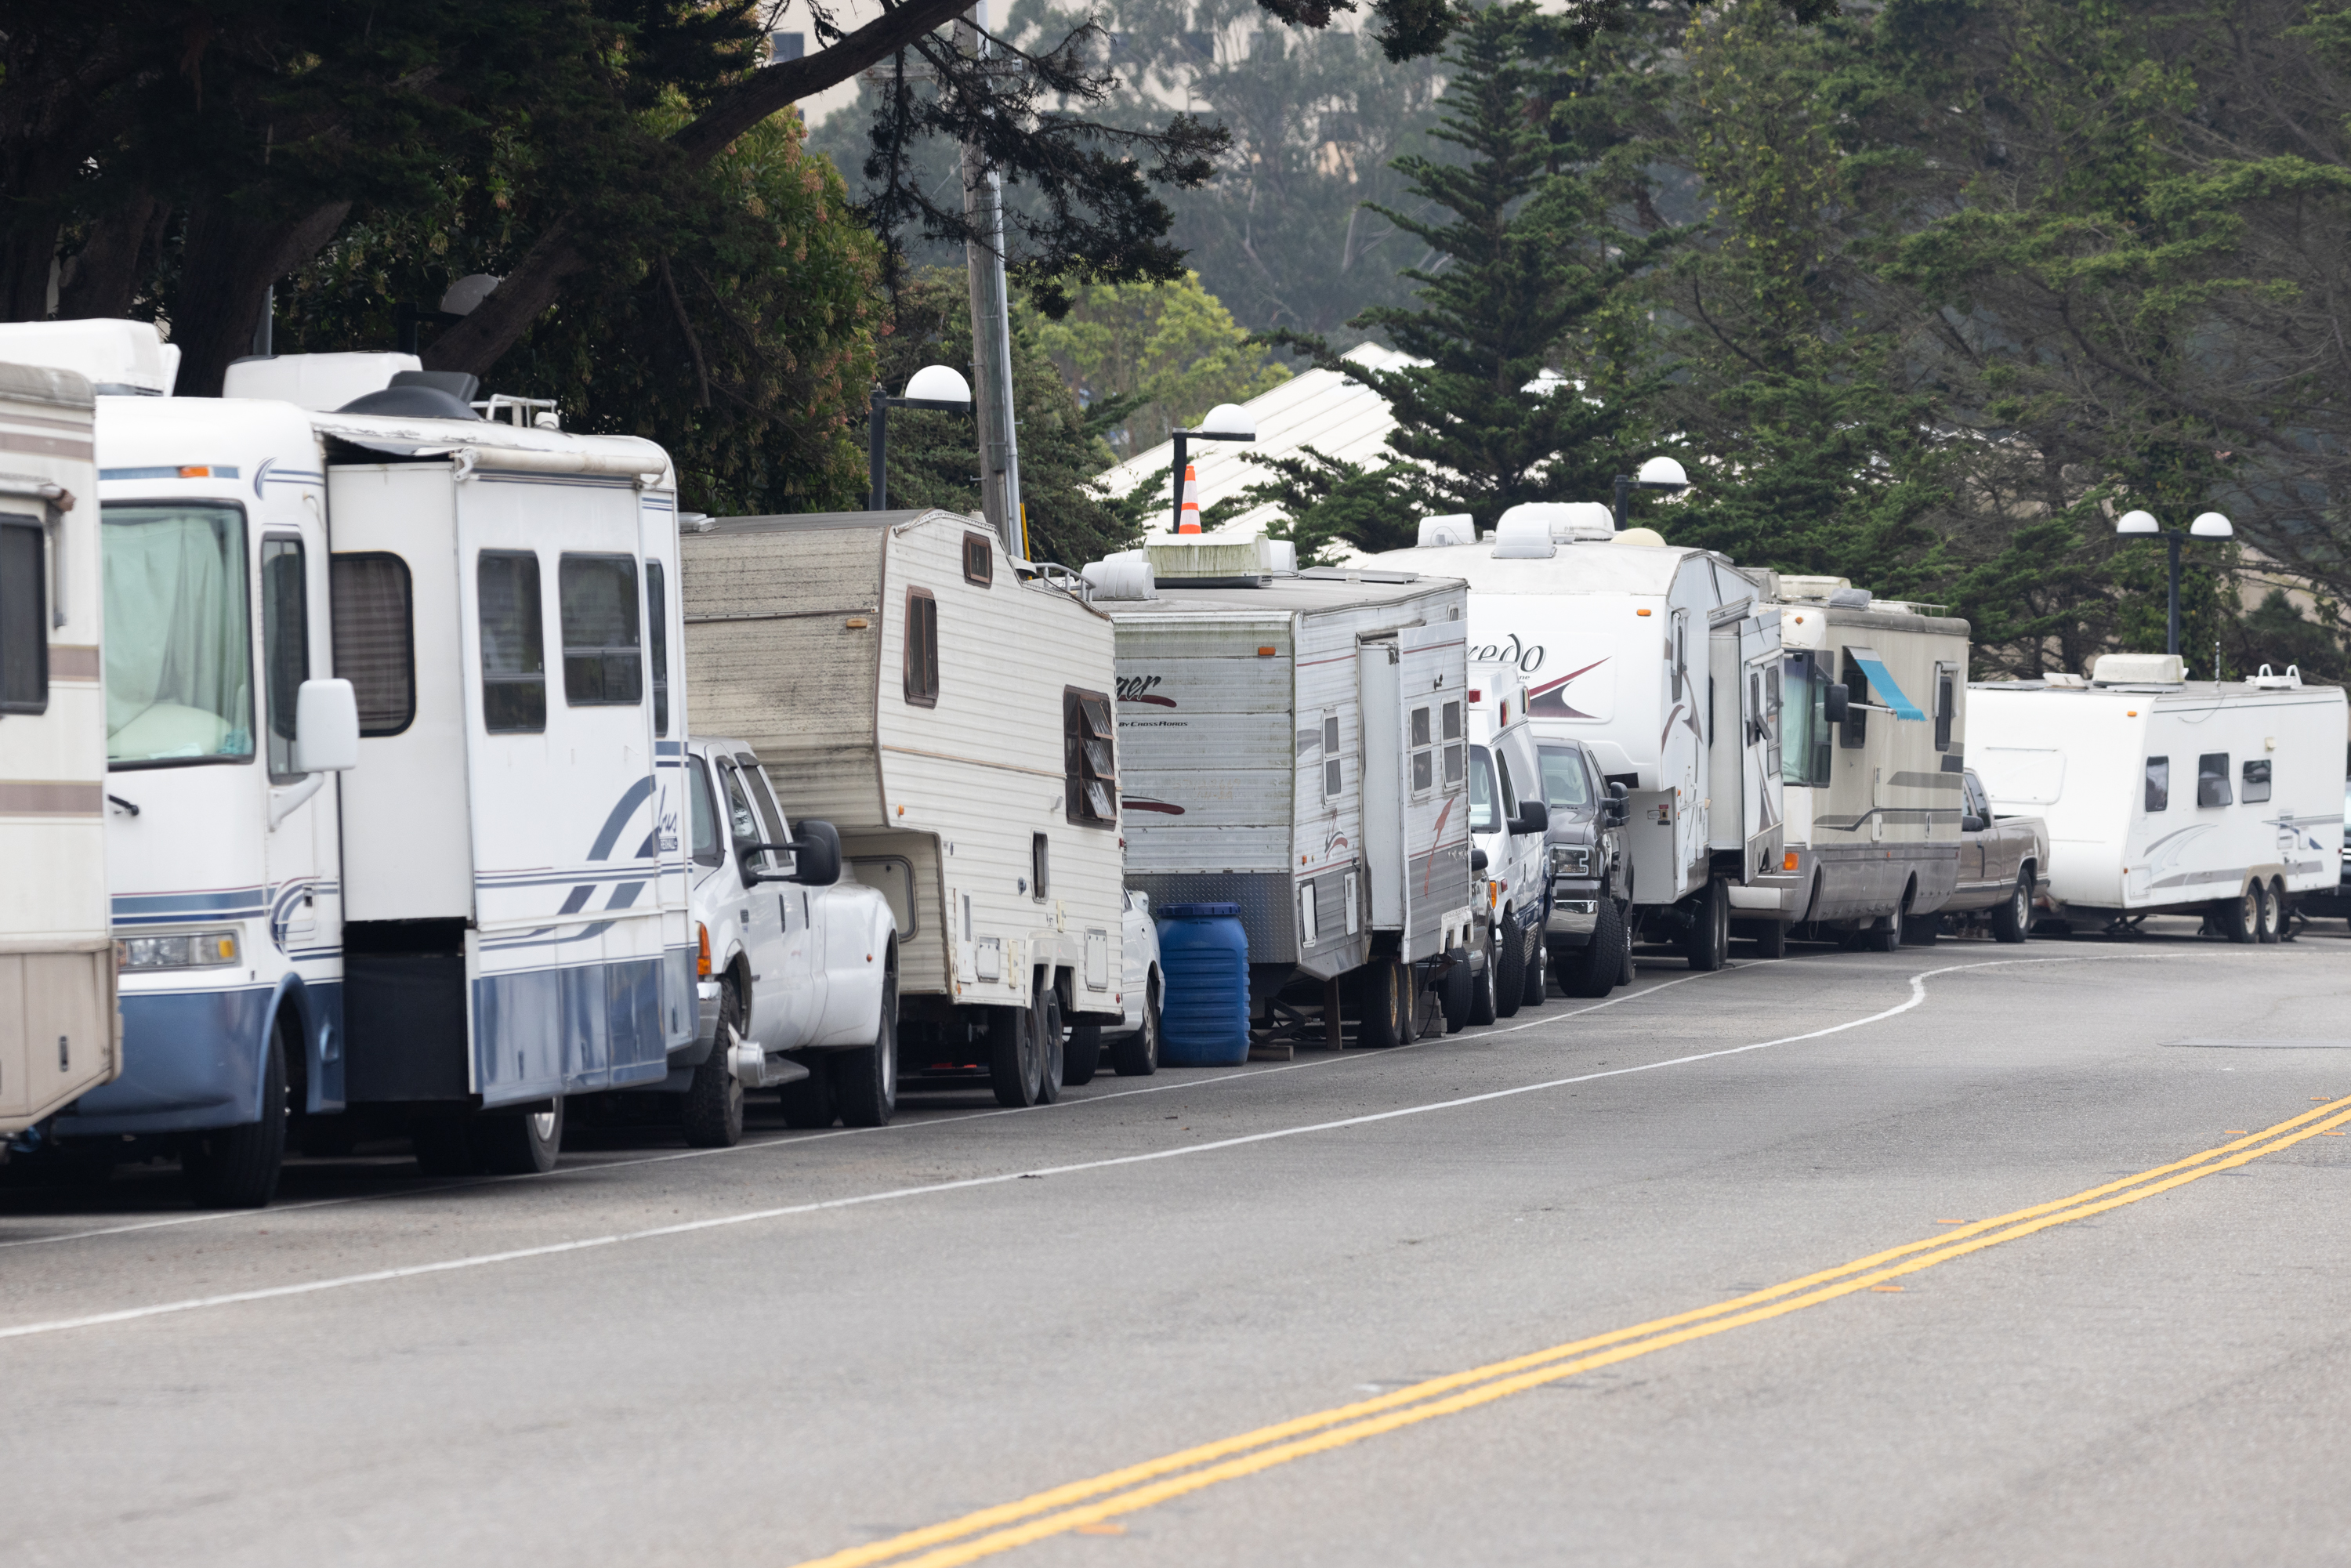 A line of RVs parked on the sidewalk.